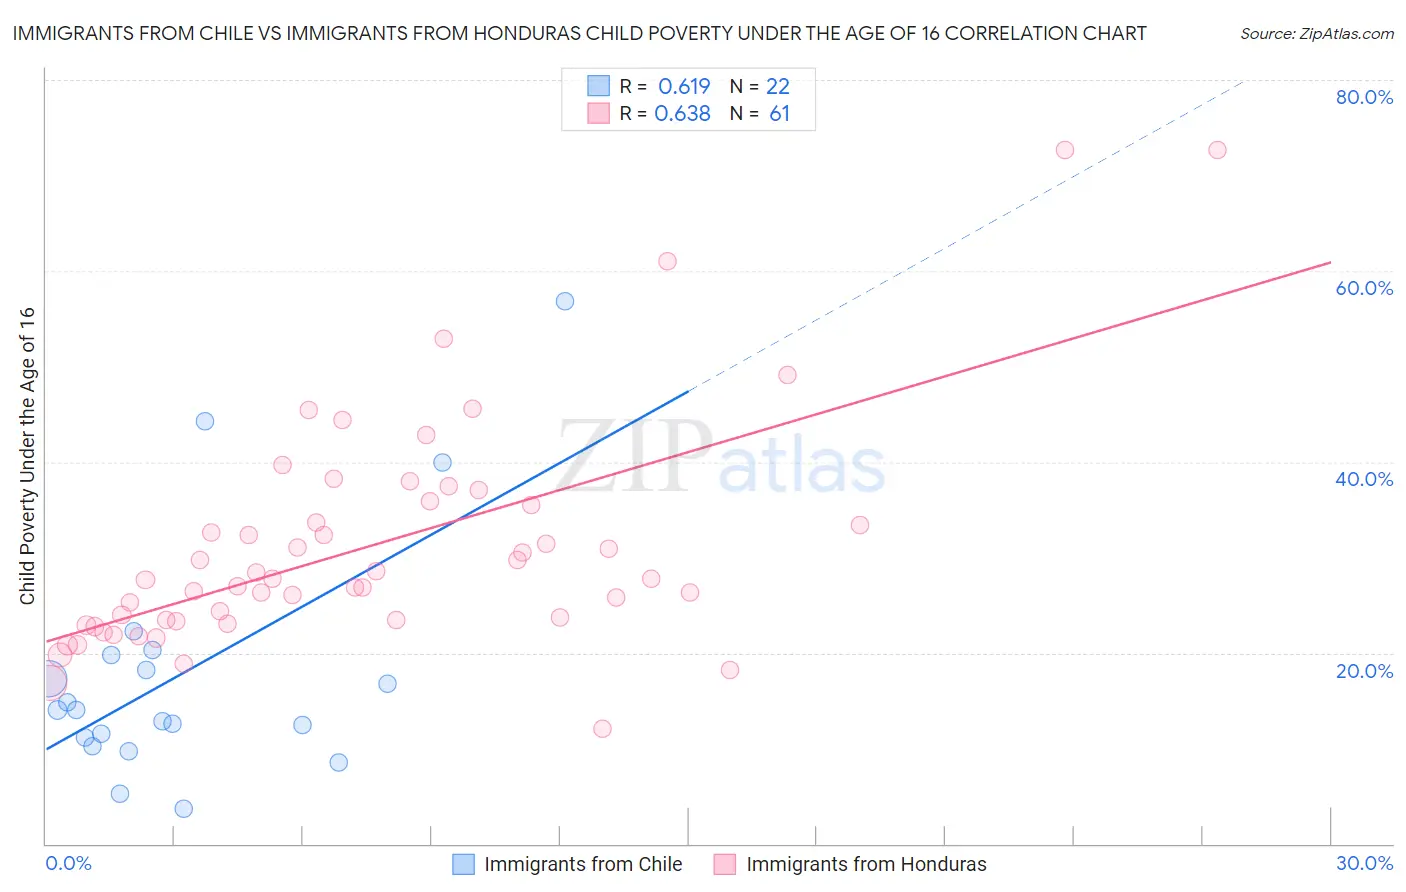 Immigrants from Chile vs Immigrants from Honduras Child Poverty Under the Age of 16